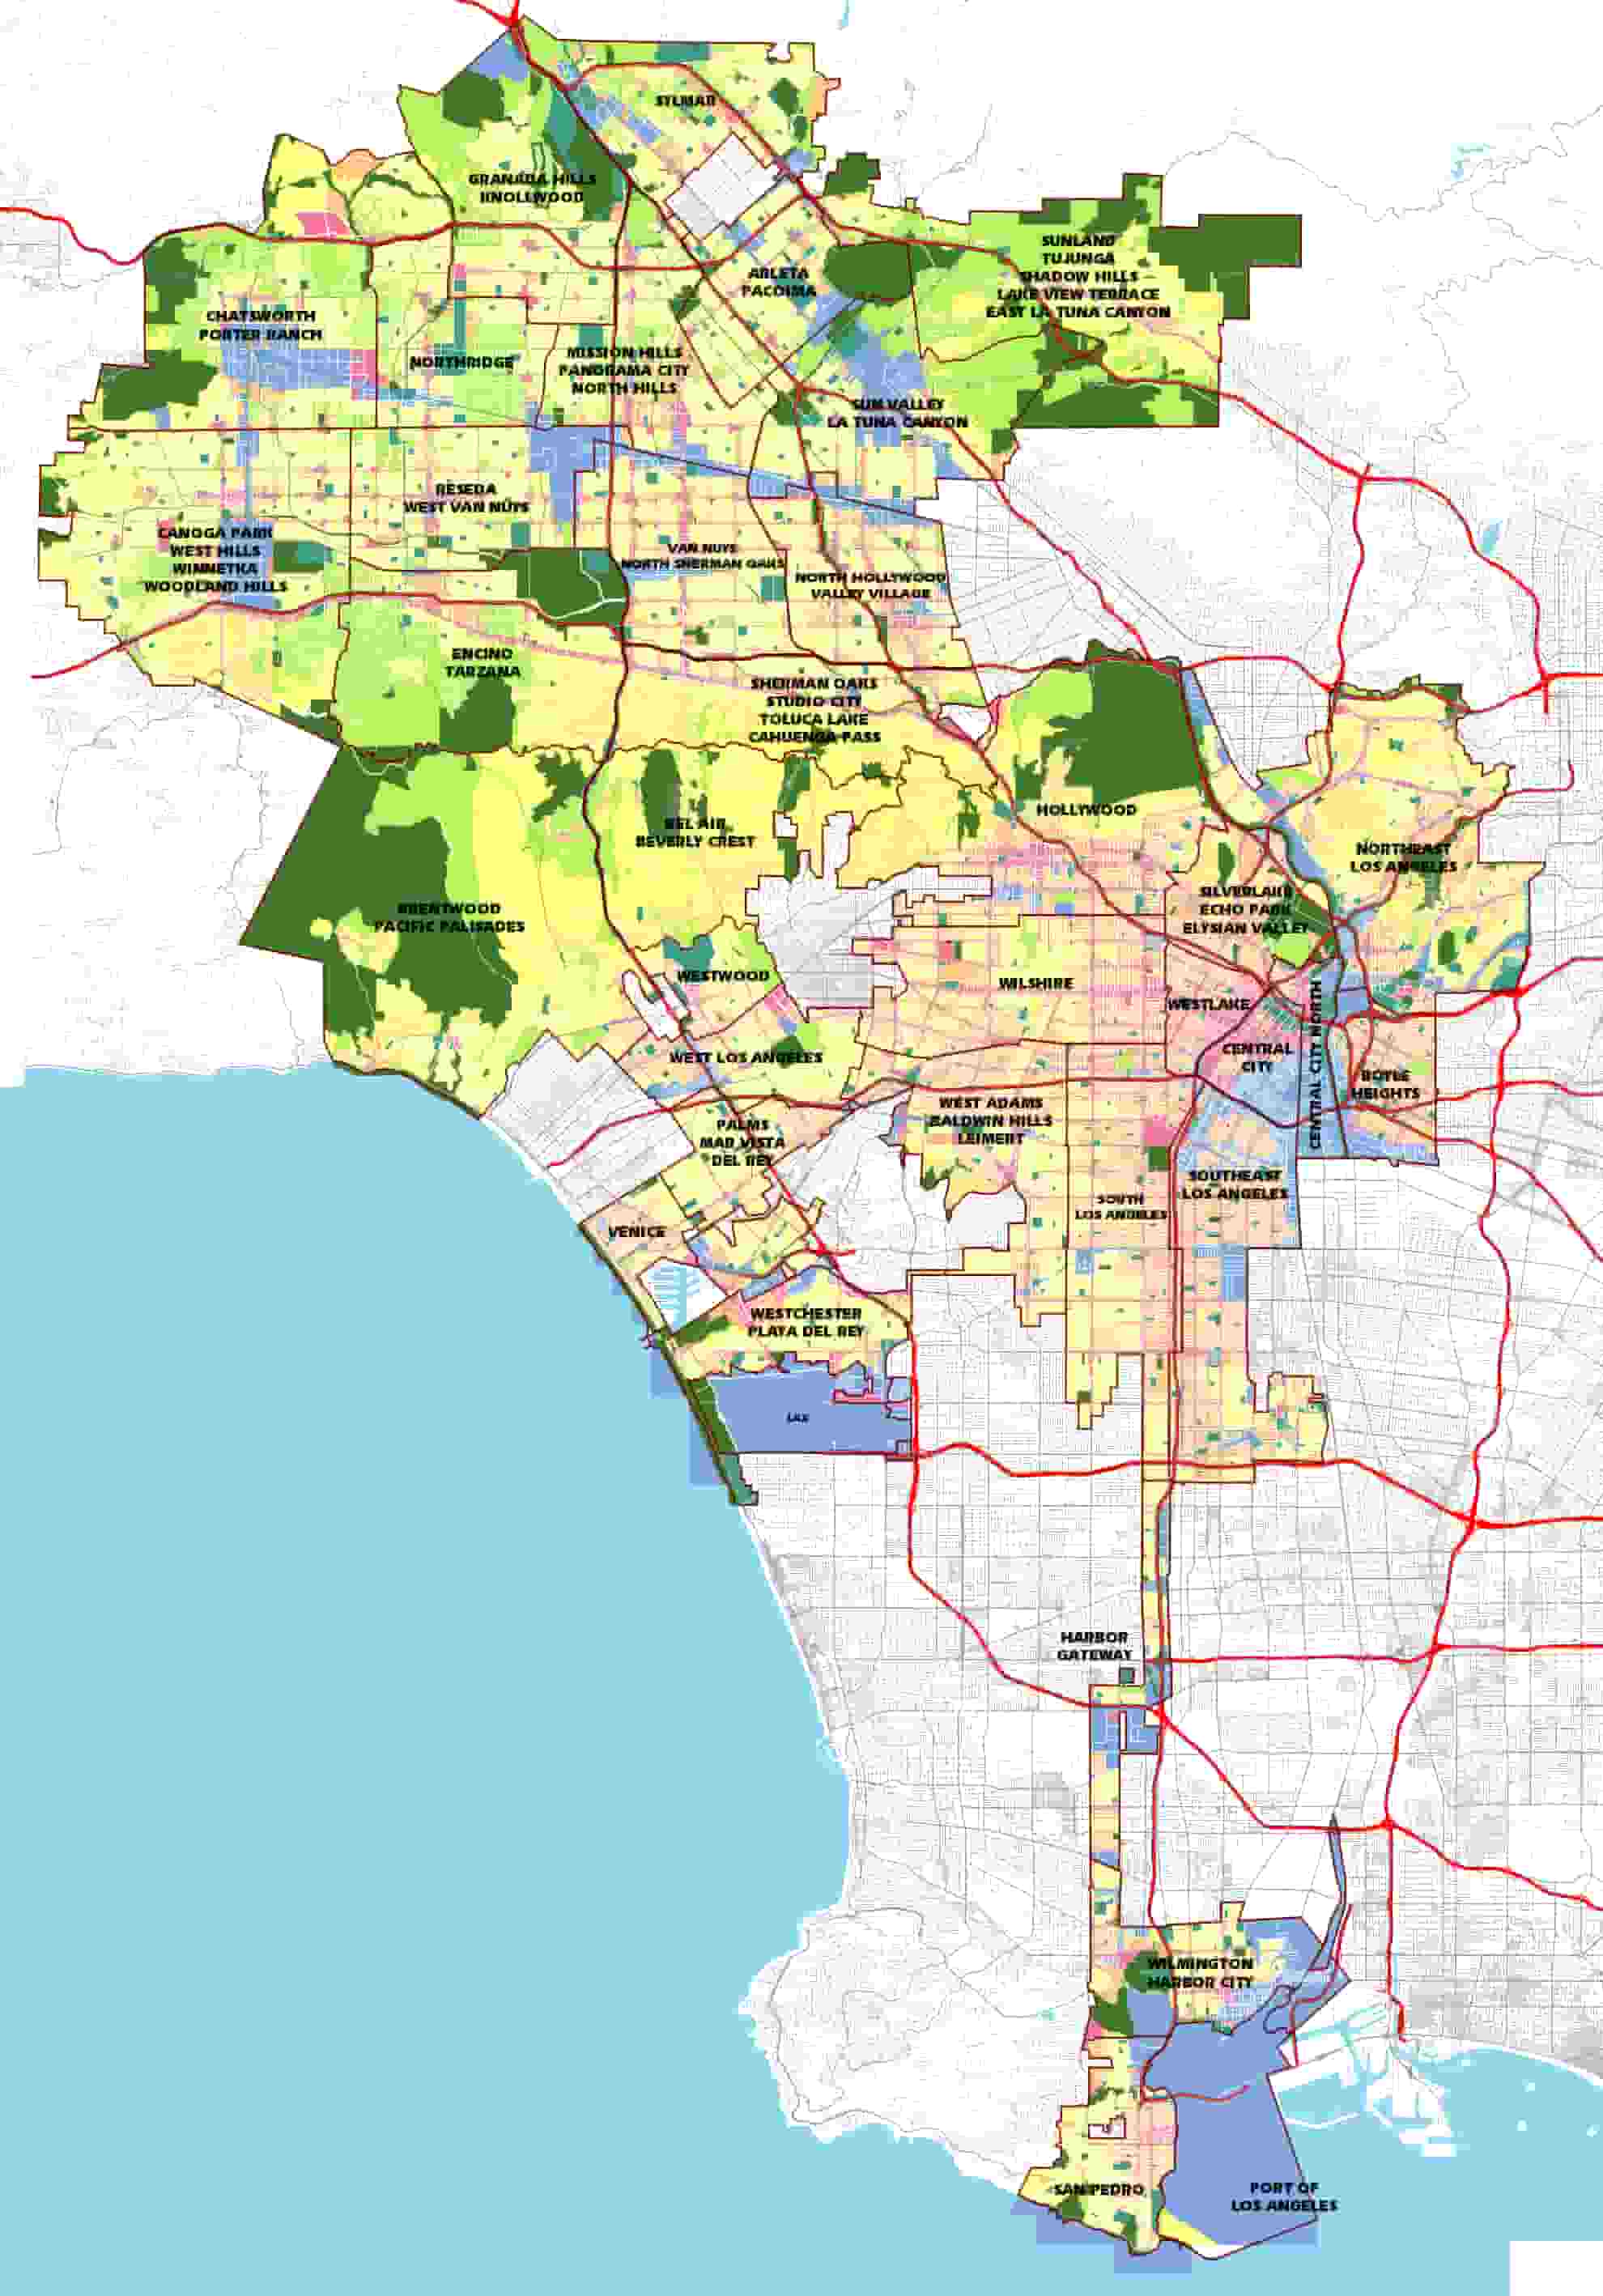 Zoning Map of Los Angeles County